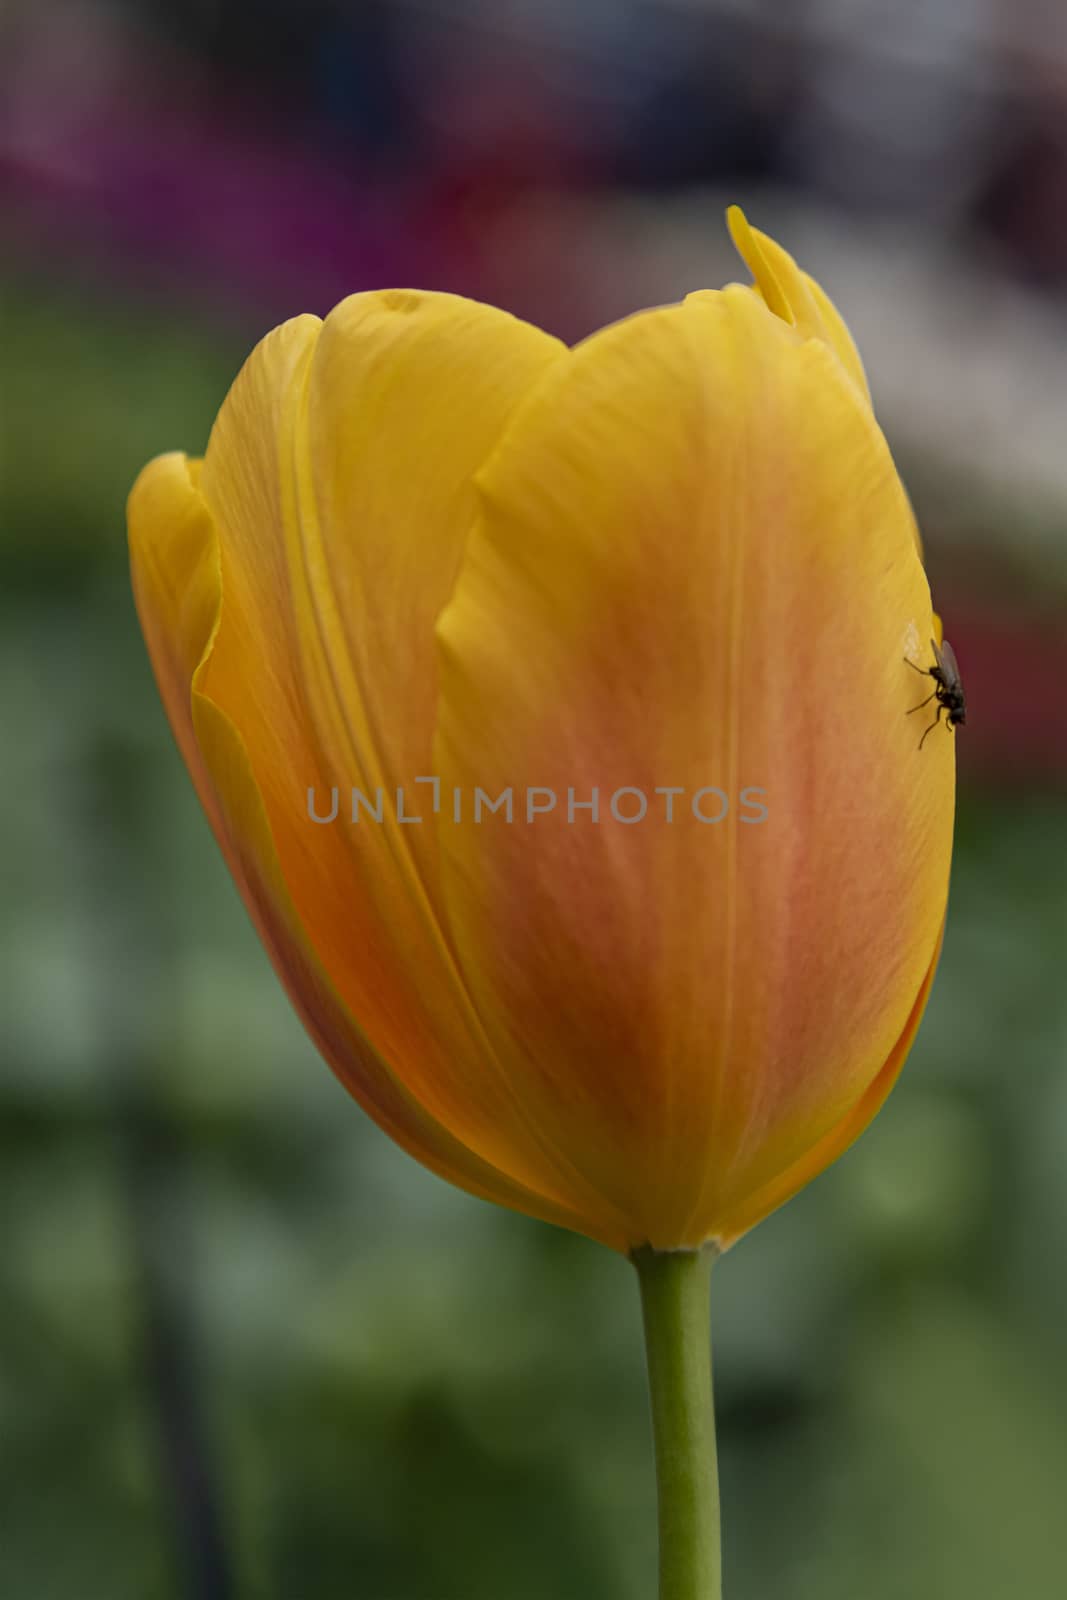 A black fly resting on a yellow orange tulip blossom against a green blurry background by ankorlight